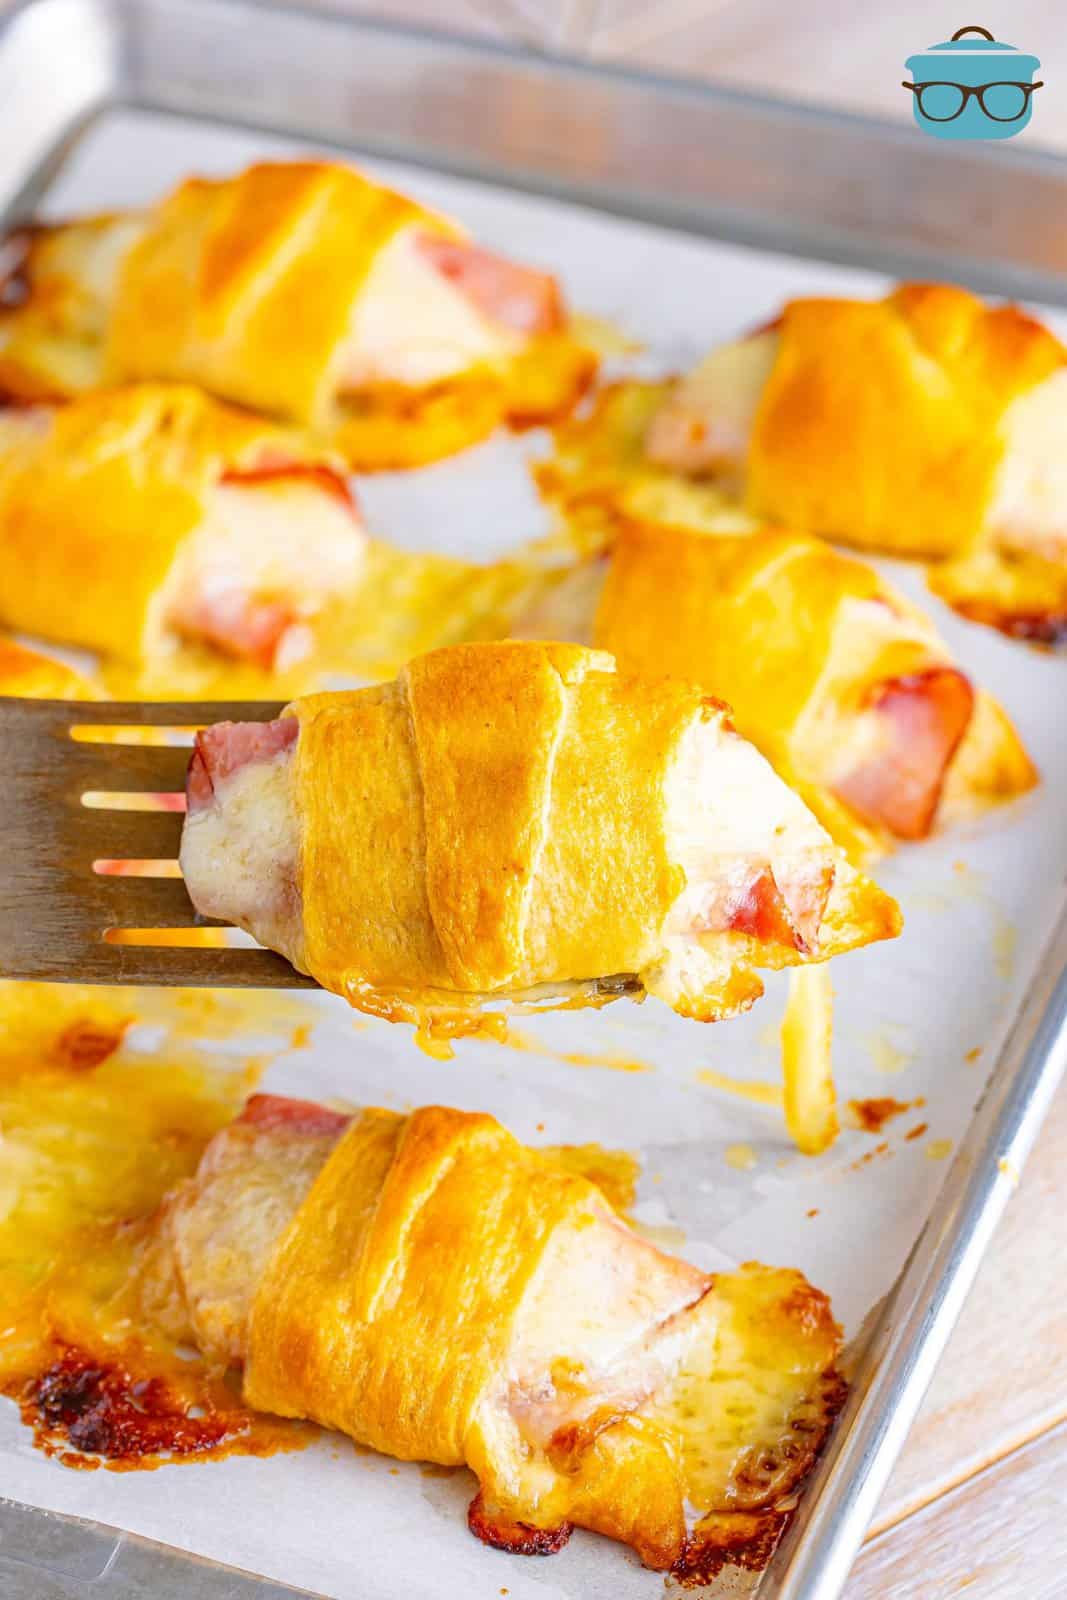 A serving utensil holding up a Ham and Cheese Crescent Roll above a plate.